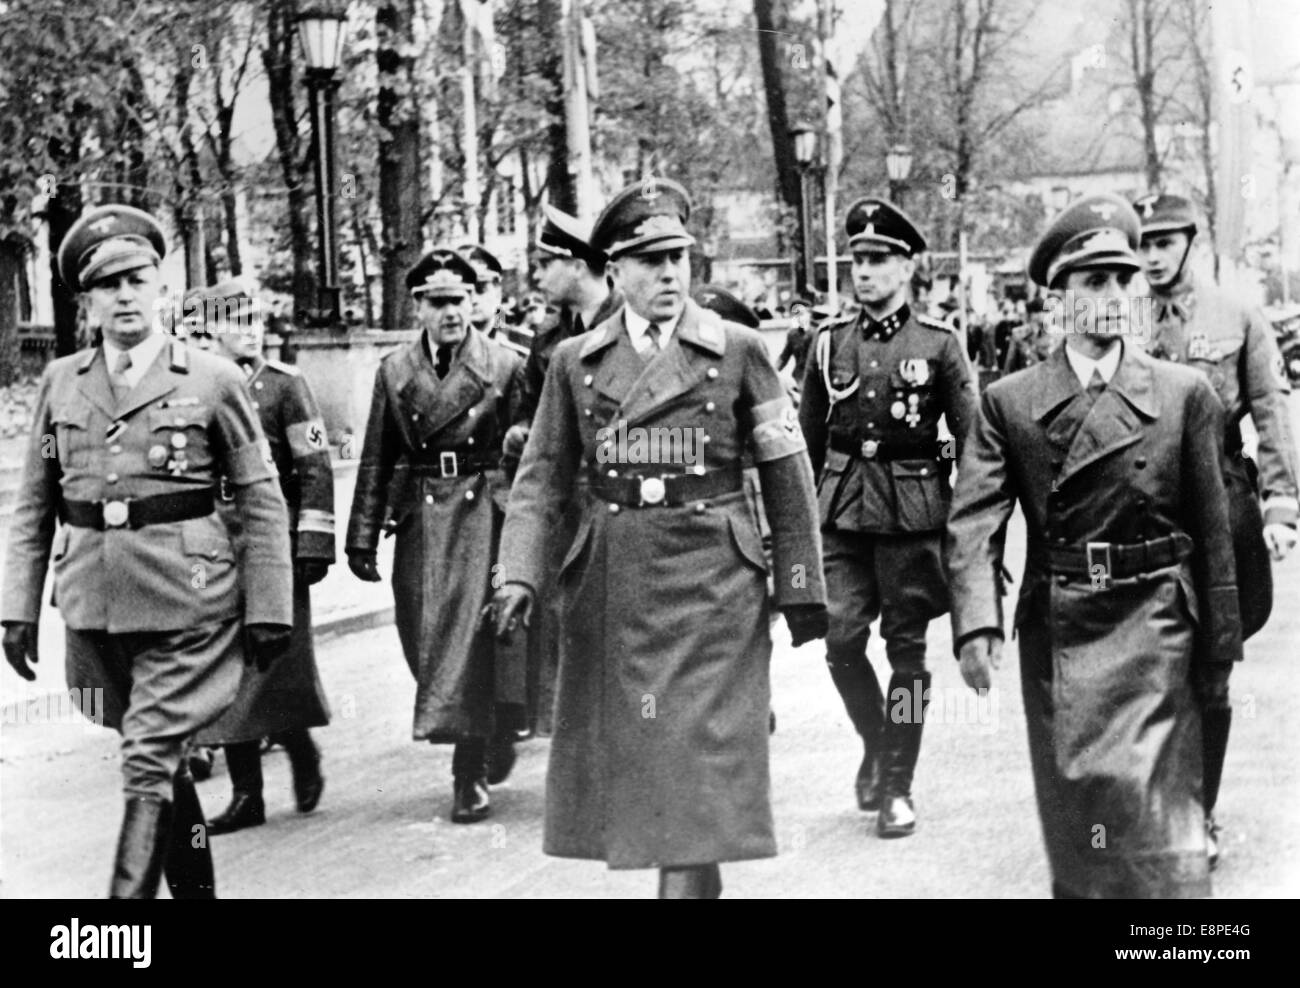 The Nazi propaganda picture shows Propaganda Minister Joseph Goebbels (R) arriving for the tenth anniversary of Gau Danzig in Danzig, Poland, October 1940. Gauleiter Albert Forster stands in the middle. Fotoarchiv für Zeitgeschichtee - NO WIRE SERVICE Stock Photo